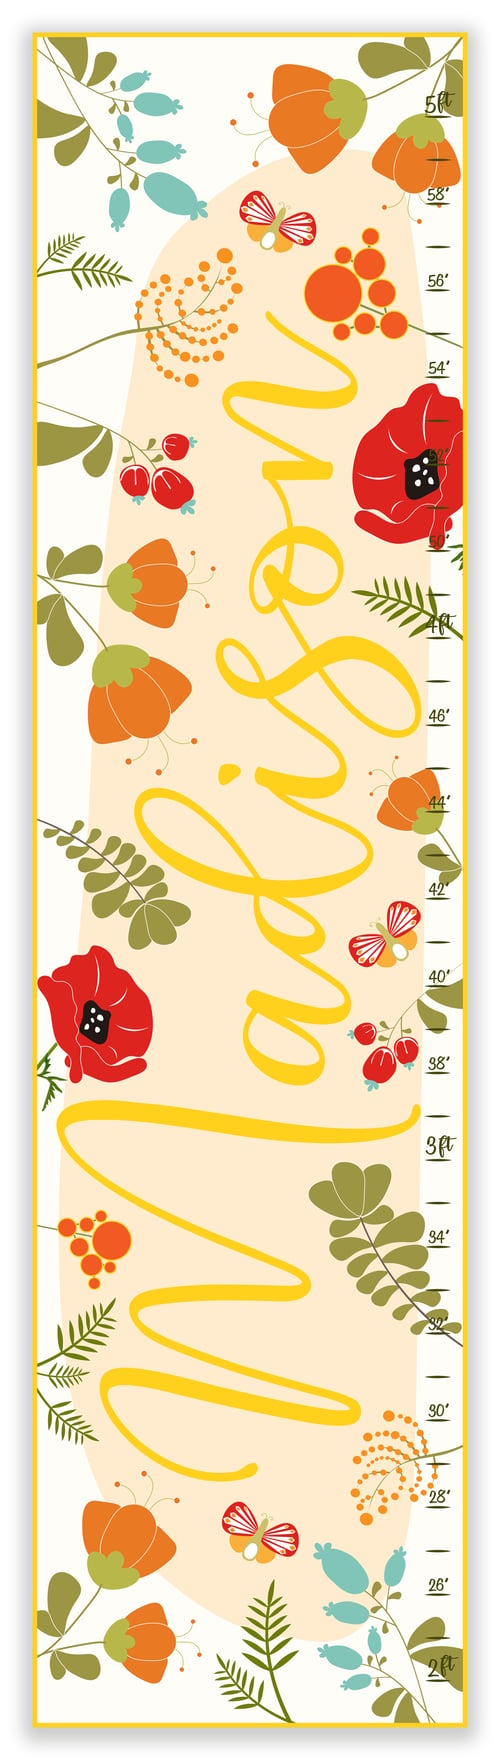 Image of Personalized Calligraphy Canvas Growth Chart - Orange Red and Yellow Flowers